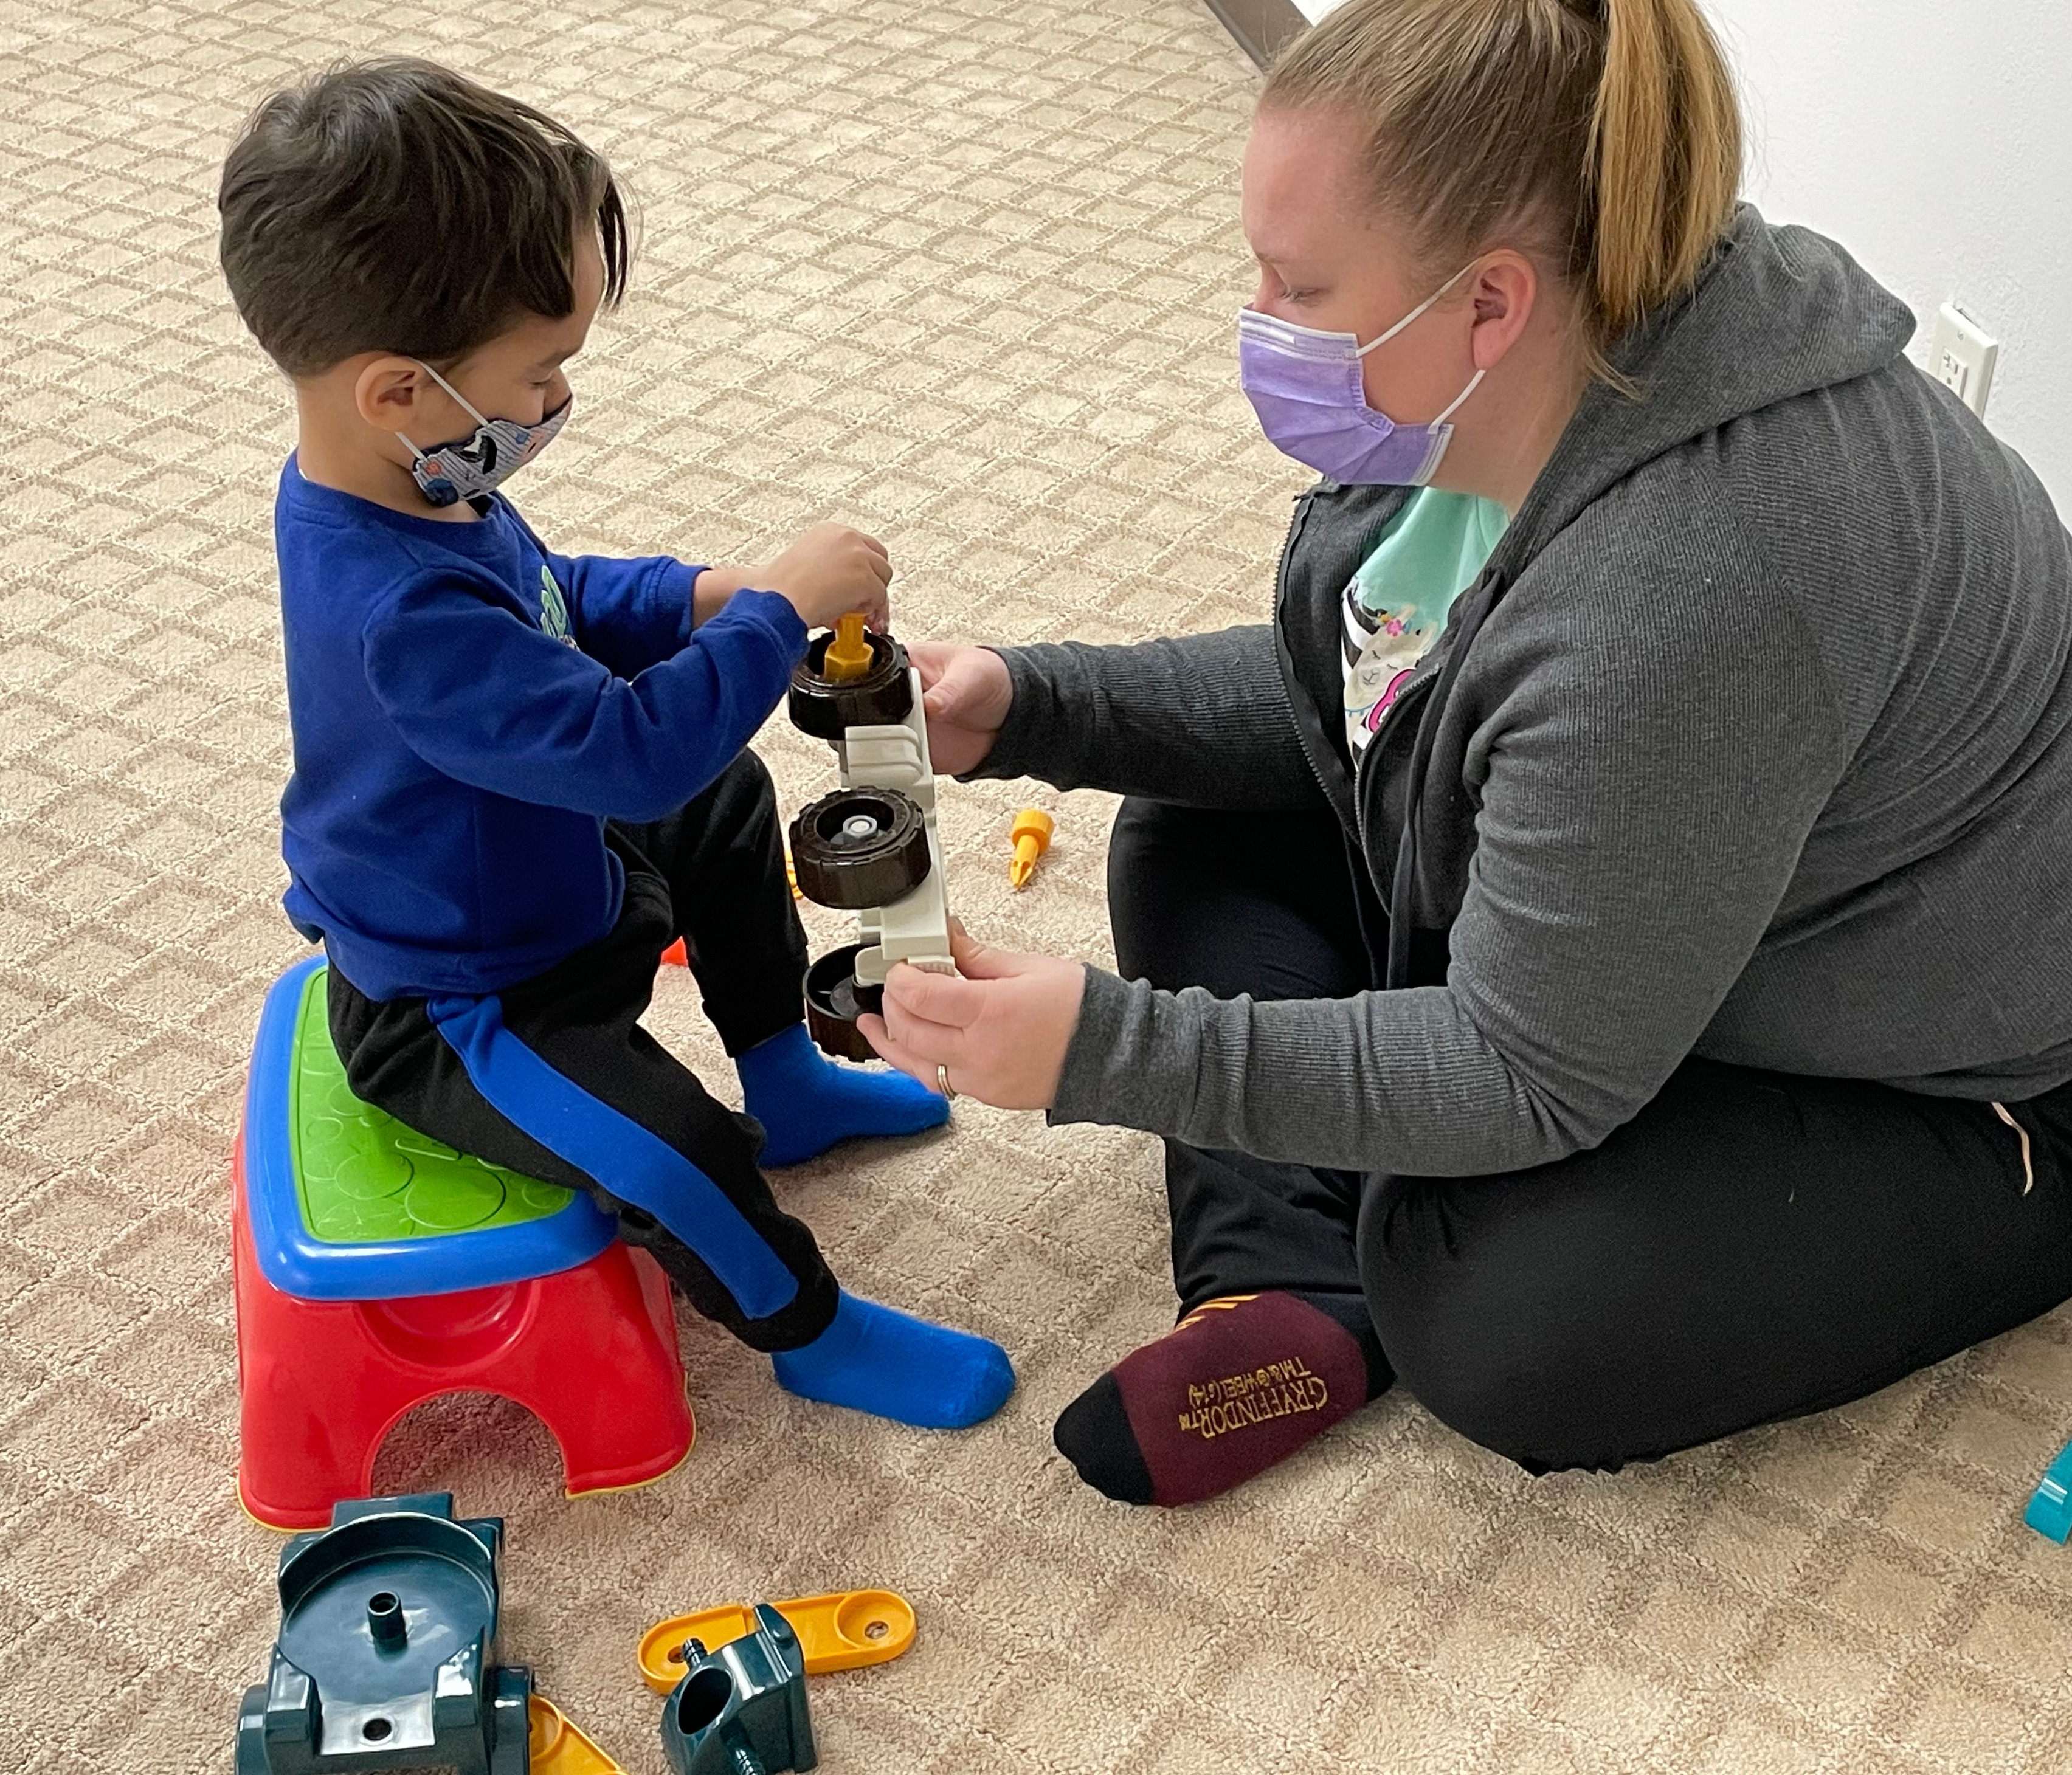 Image of a Child building a truck with the therapist